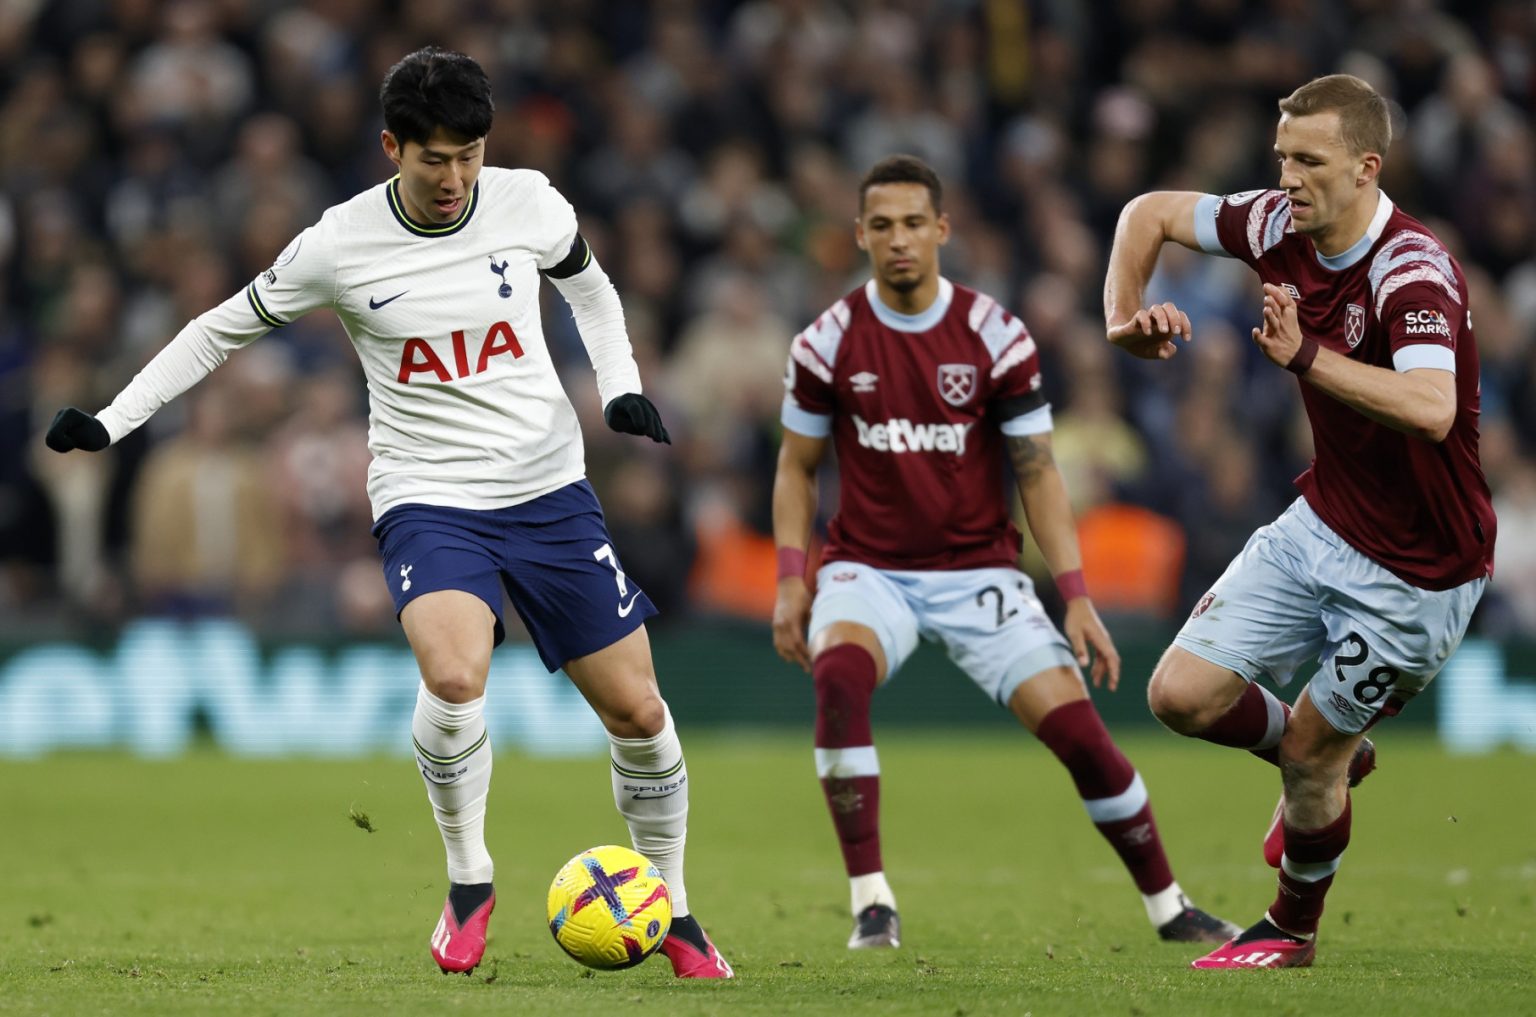 Spurs call for action after ‘reprehensible’ racist abuse of Son